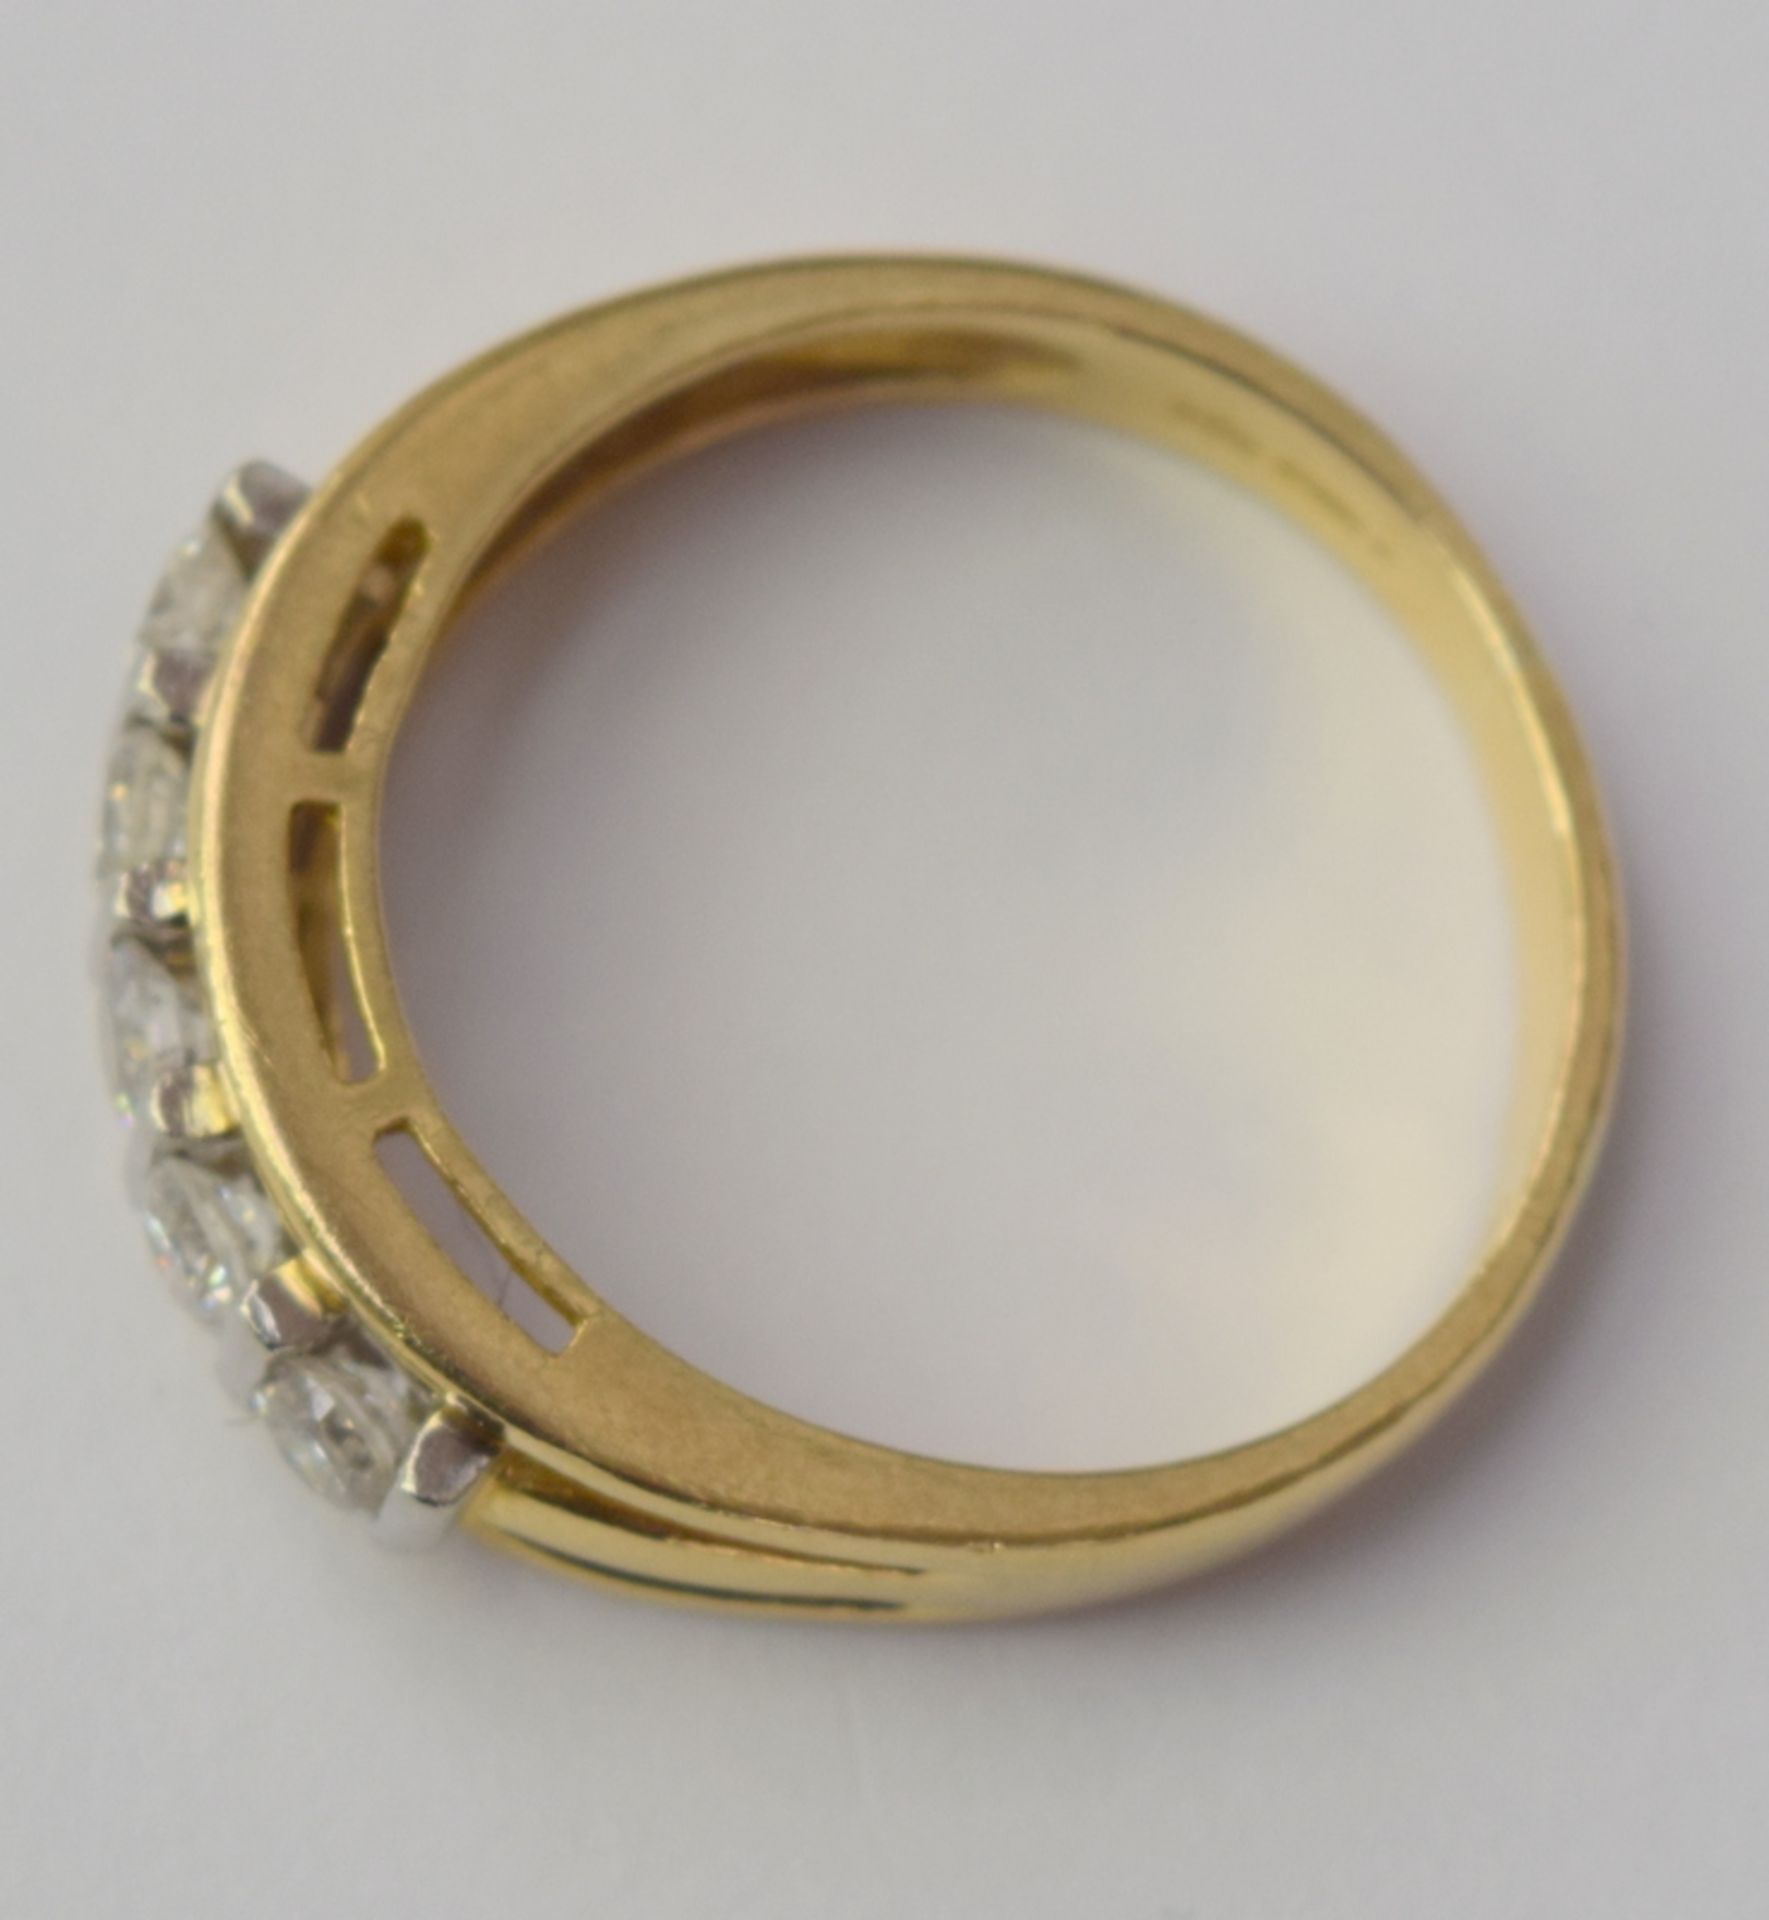 Excellent 18ct Gold And Platinum Mount Ring With Five Clear Diamonds - Image 7 of 7